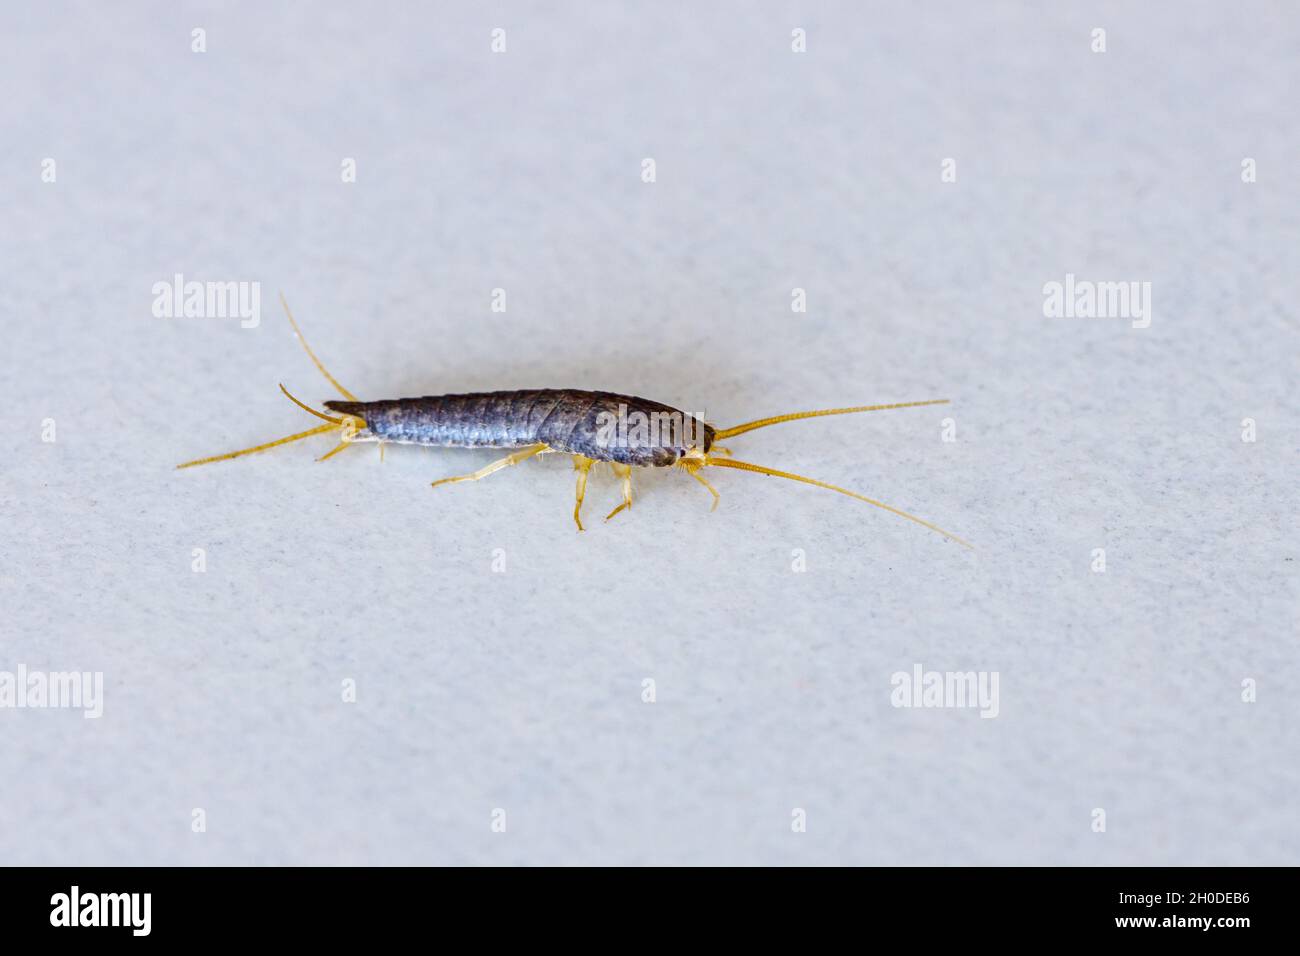 A silverfish or bookworm on a white background Stock Photo